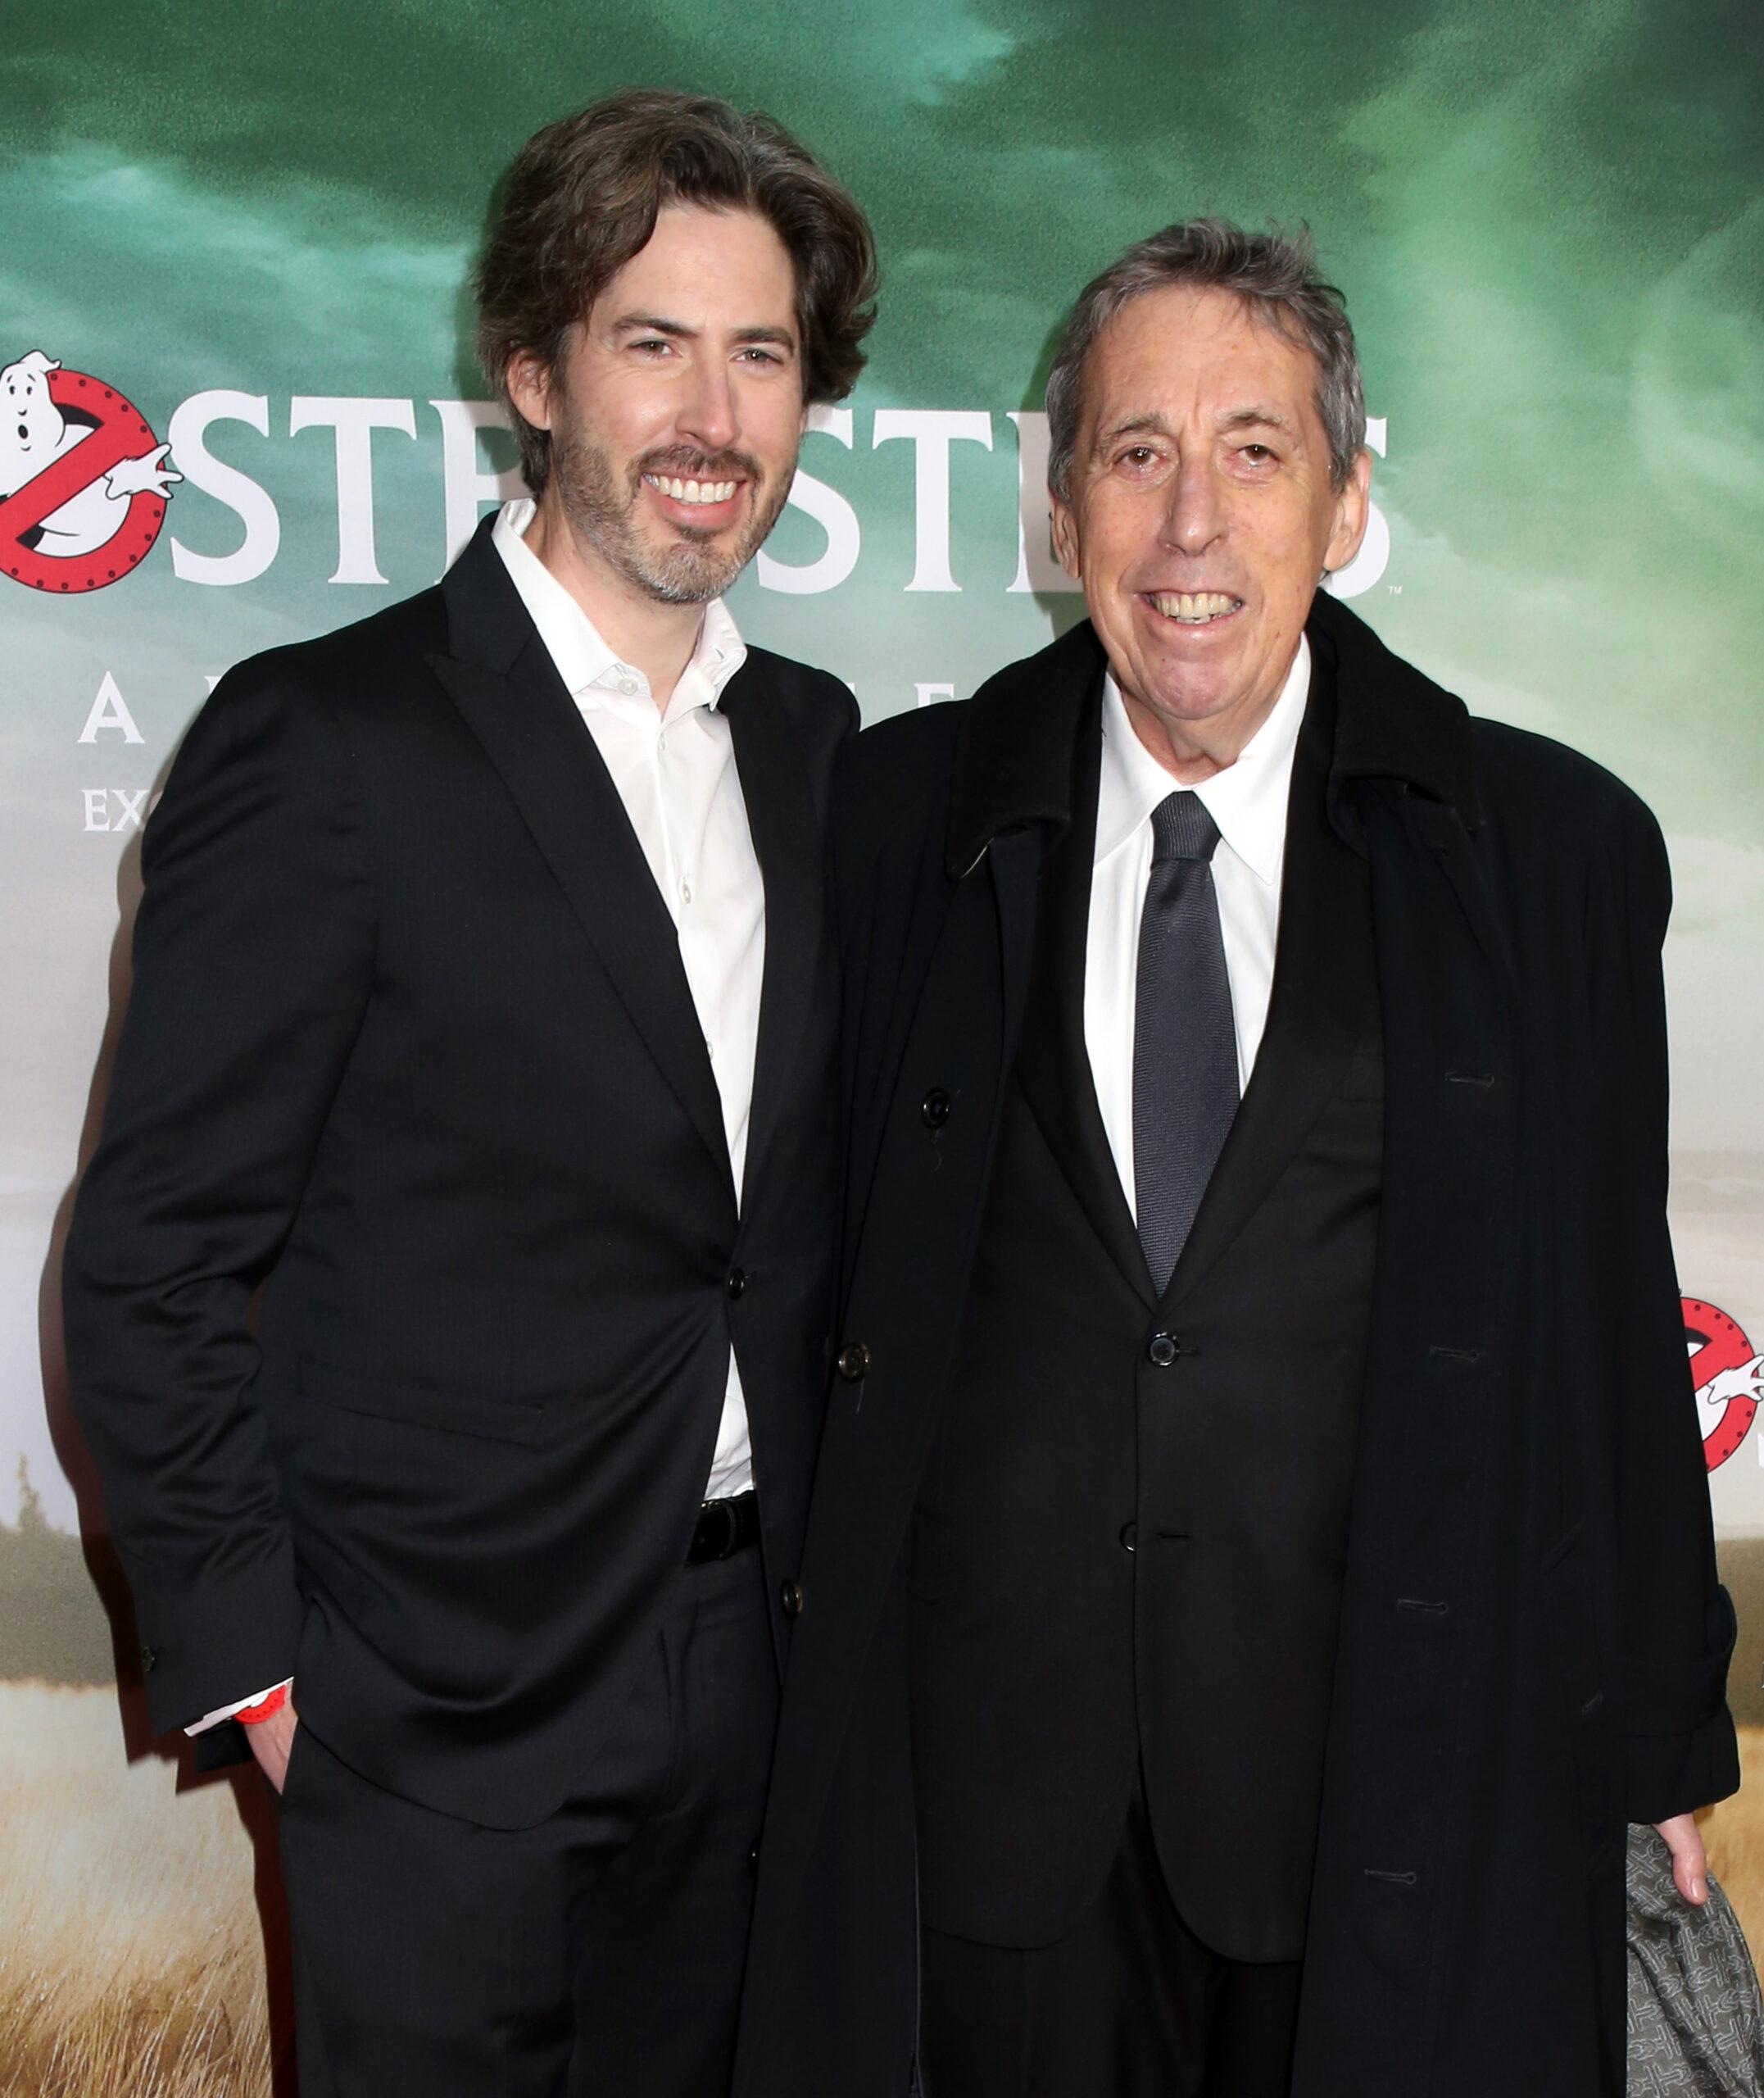 Director Ivan Reitman died peacefully in his sleep at his home in Montecito, California at the age of 75 on February 12, 2022. Ivan Reitman and Genevieve Robert at the Los Angeles premiere of "Tully" held at the Regal Cinemas L.A. Live on April 18, 2018 in Los Angeles, CA. © O'Connor/AFF-USA.com. 13 Feb 2022 Pictured: Jason Reitman and Ivan Reitman. Photo credit: OConnor/AFF-USA.com / MEGA TheMegaAgency.com +1 888 505 6342 (Mega Agency TagID: MEGA828246_001.jpg) [Photo via Mega Agency]